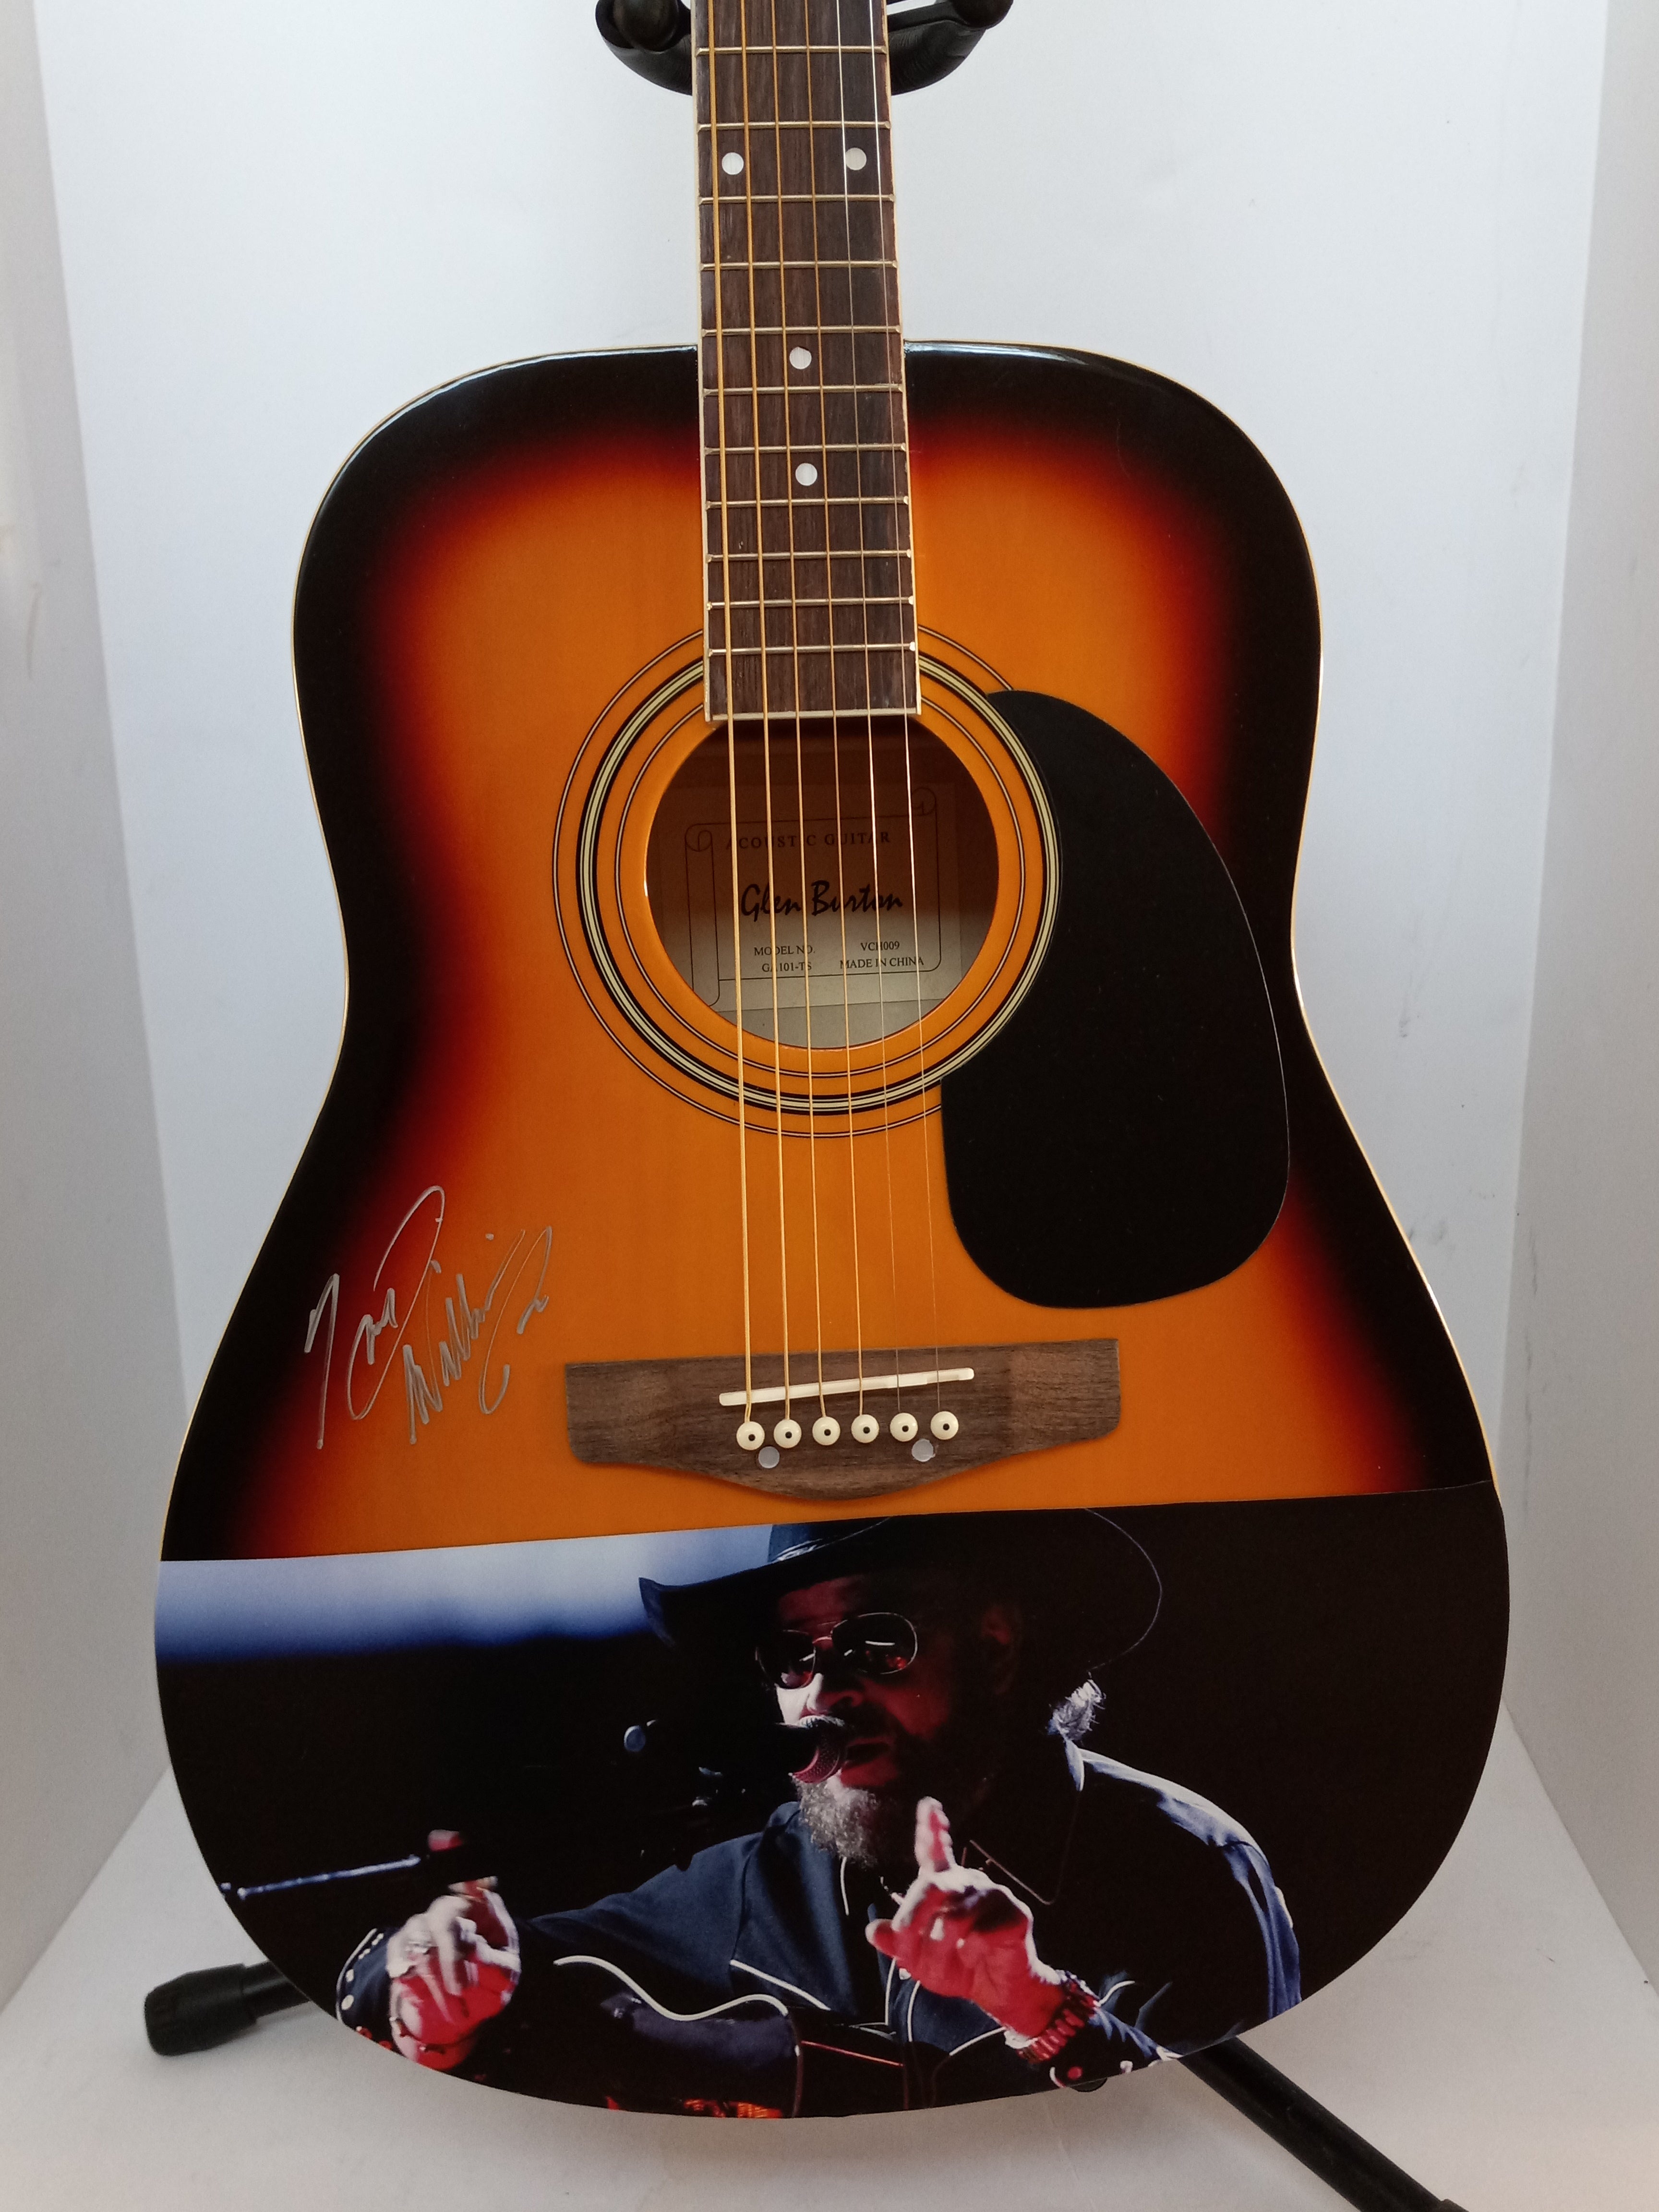 Hank Williams Jr acoustic one of a kind guitar signed with proof